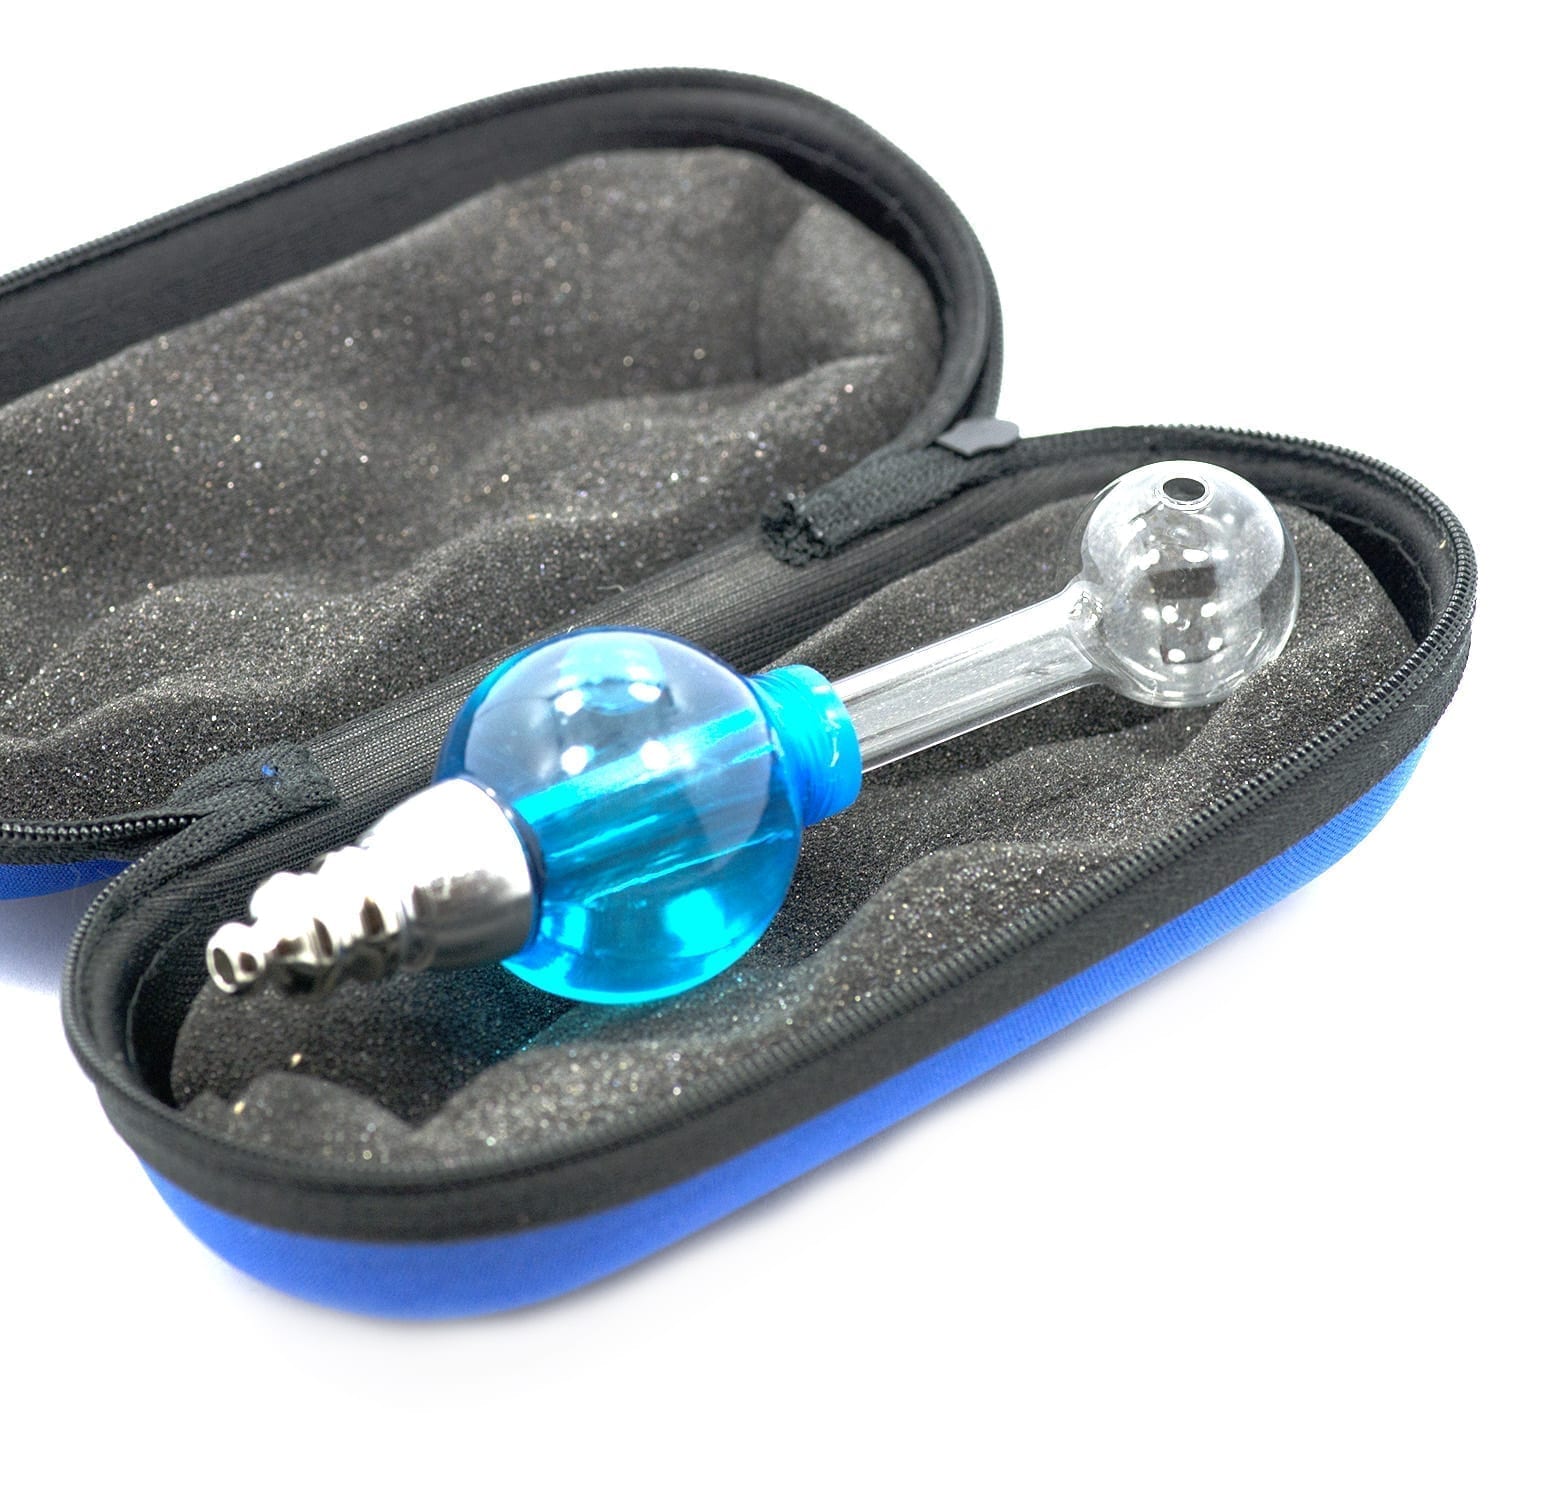 Glass oil burner pipe Liquid with metal Mouth Piece